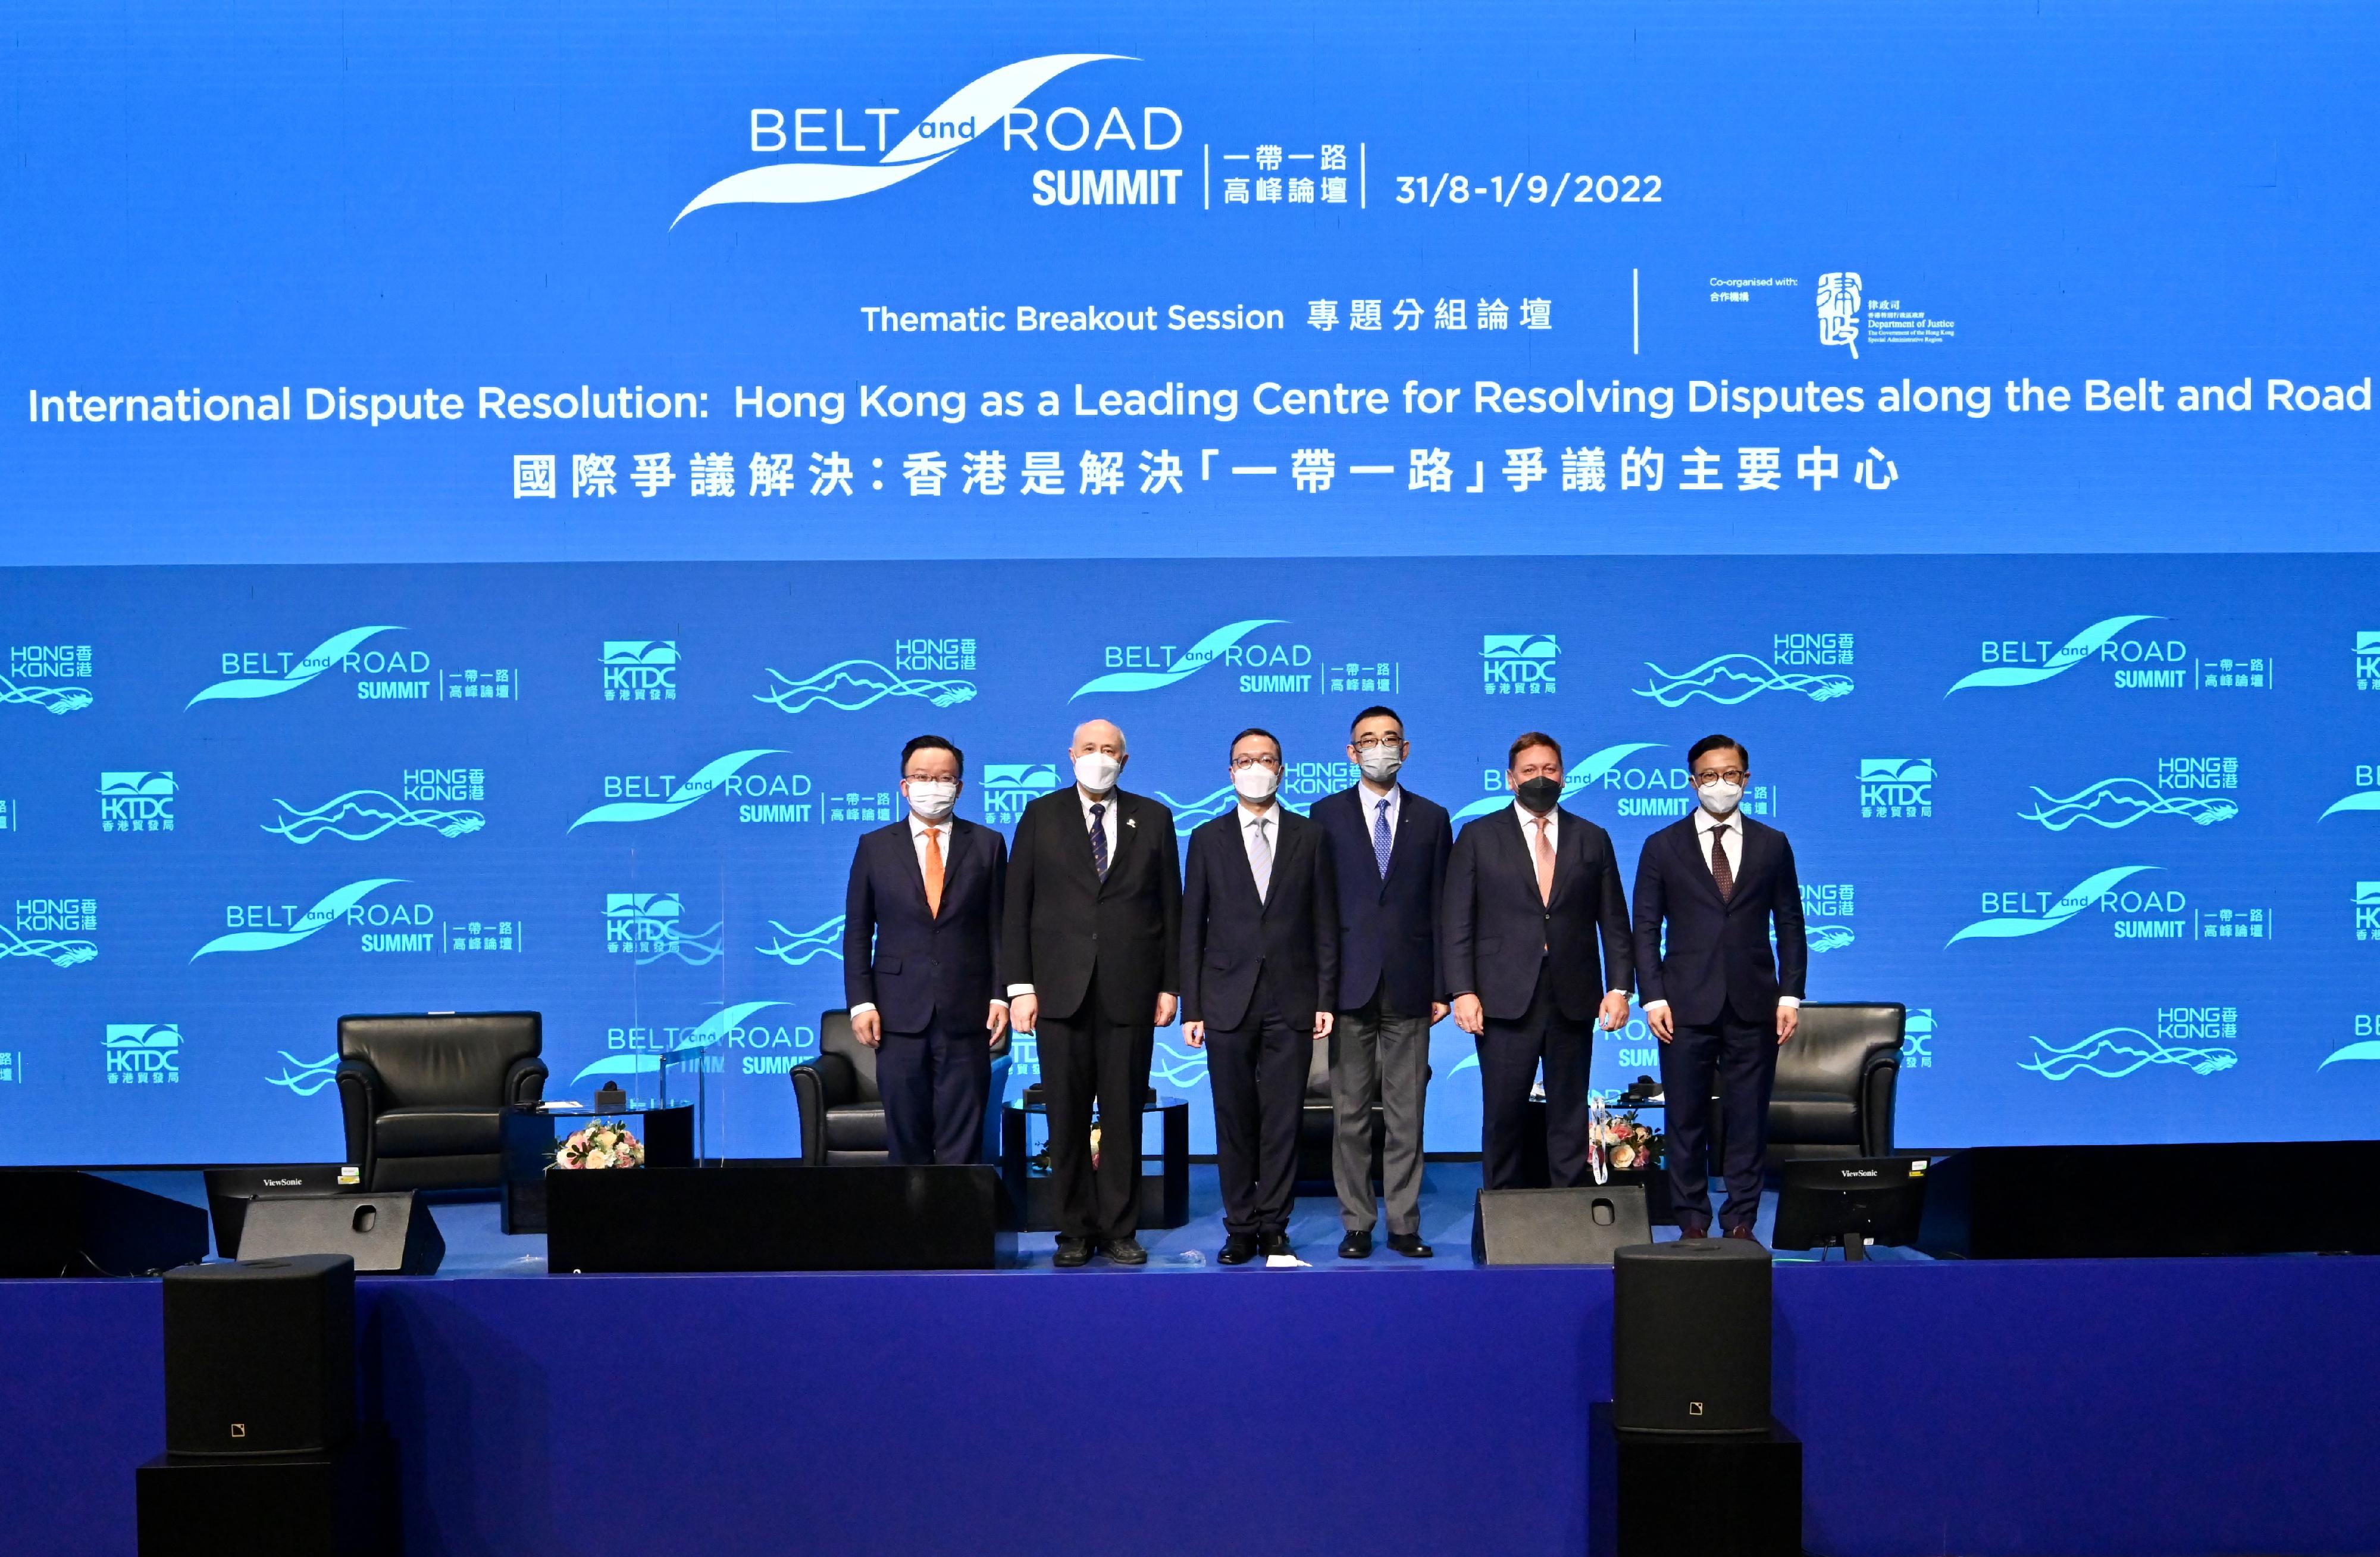 The Secretary for Justice, Mr Paul Lam, SC (third left); the Deputy Secretary for Justice, Mr Cheung Kwok-kwan (first right); the Panel Chair, Dr Anthony Neoh (second left); and speakers Mr Nick Chan (first left), Dr Thomas So (third right) and Mr Justin D'Agostino (second right) attend the Belt and Road Summit's thematic breakout session titled "International Dispute Resolution: Hong Kong as a leading centre for resolving disputes along the Belt and Road" today (August 31). 